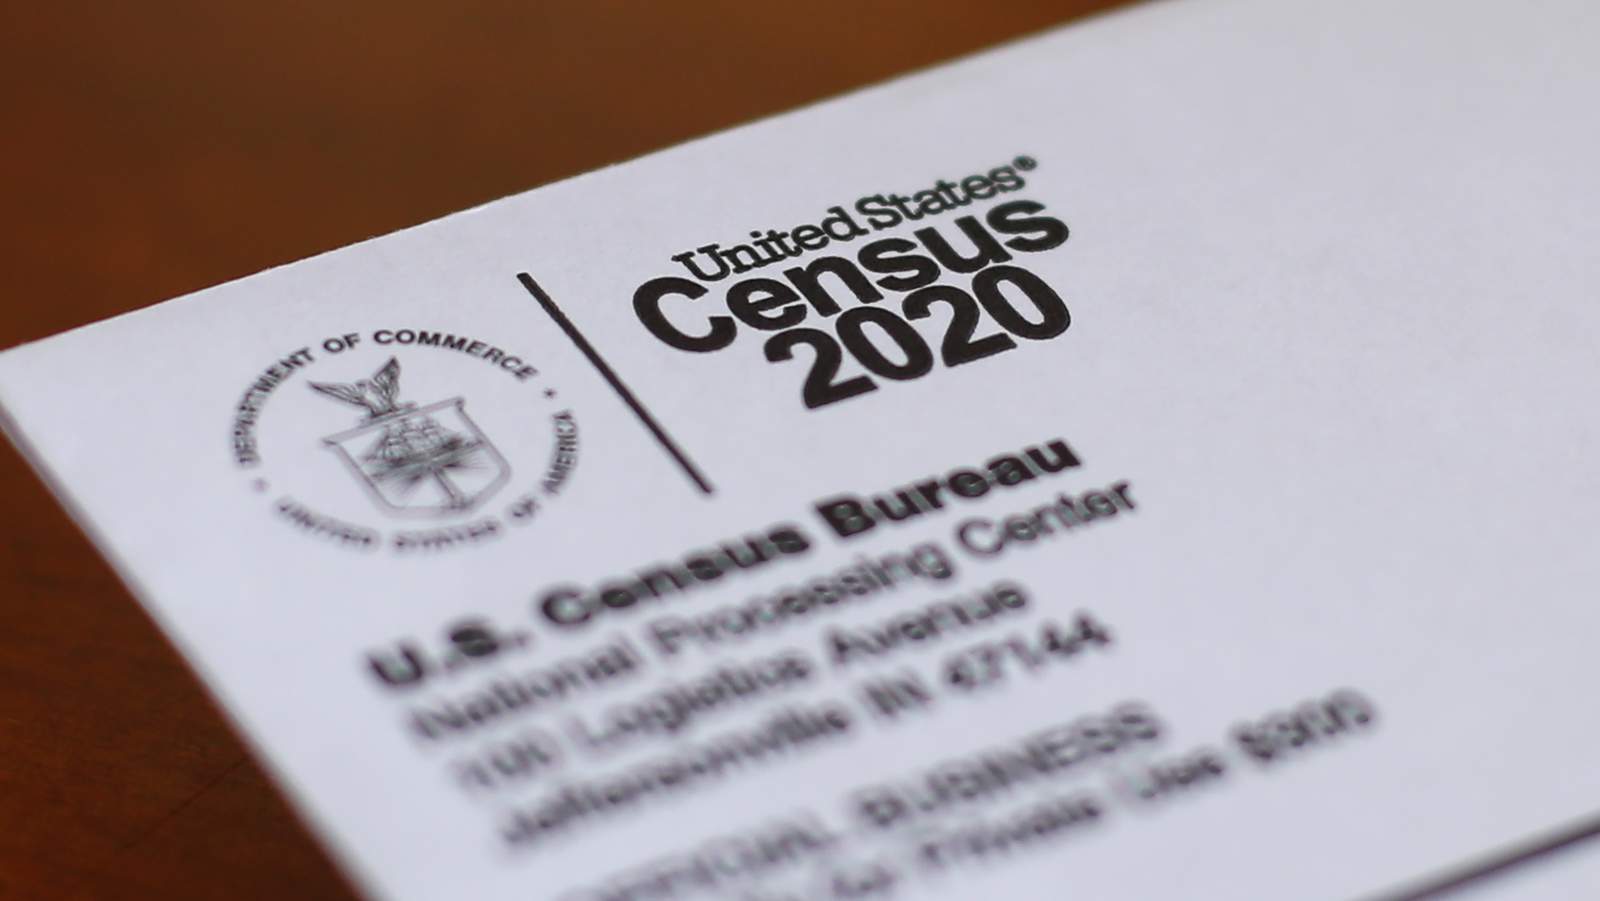 Litigants take more cooperative approach in census lawsuit